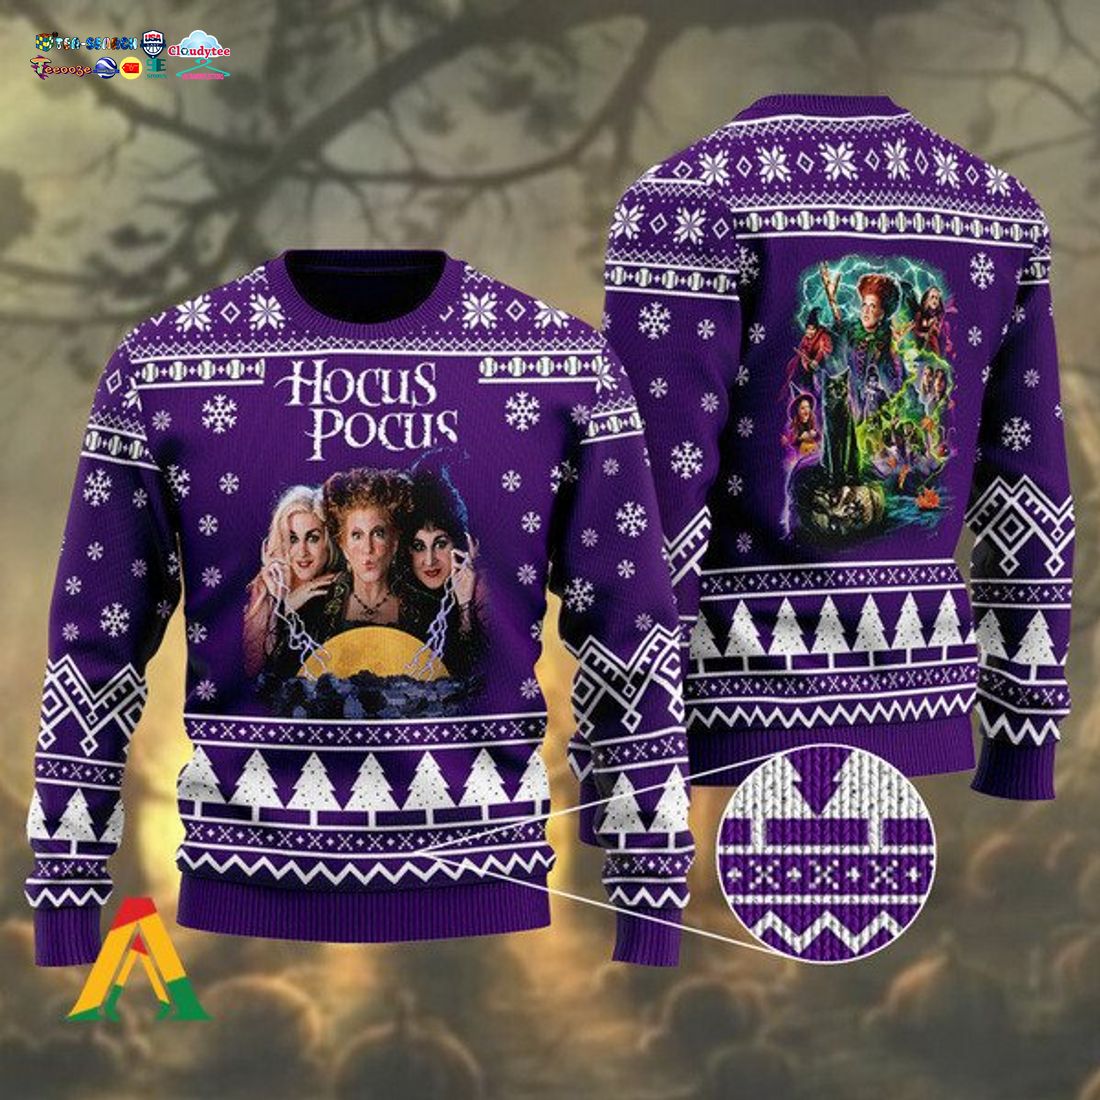 Hocus Pocus Purple Ugly Christmas Sweater - You are always amazing